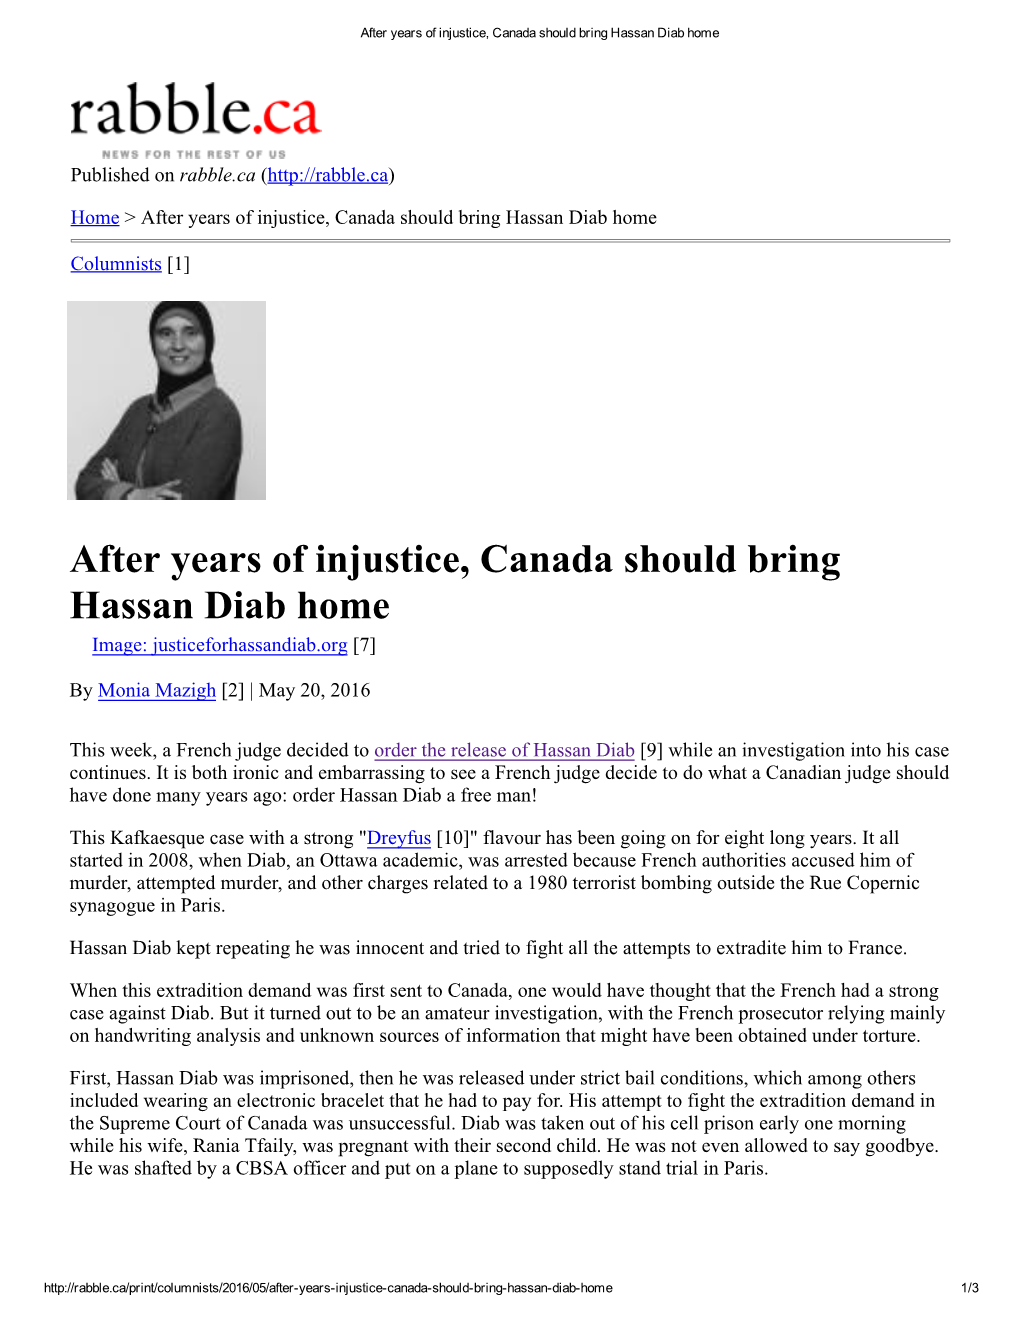 After Years of Injustice, Canada Should Bring Hassan Diab Home